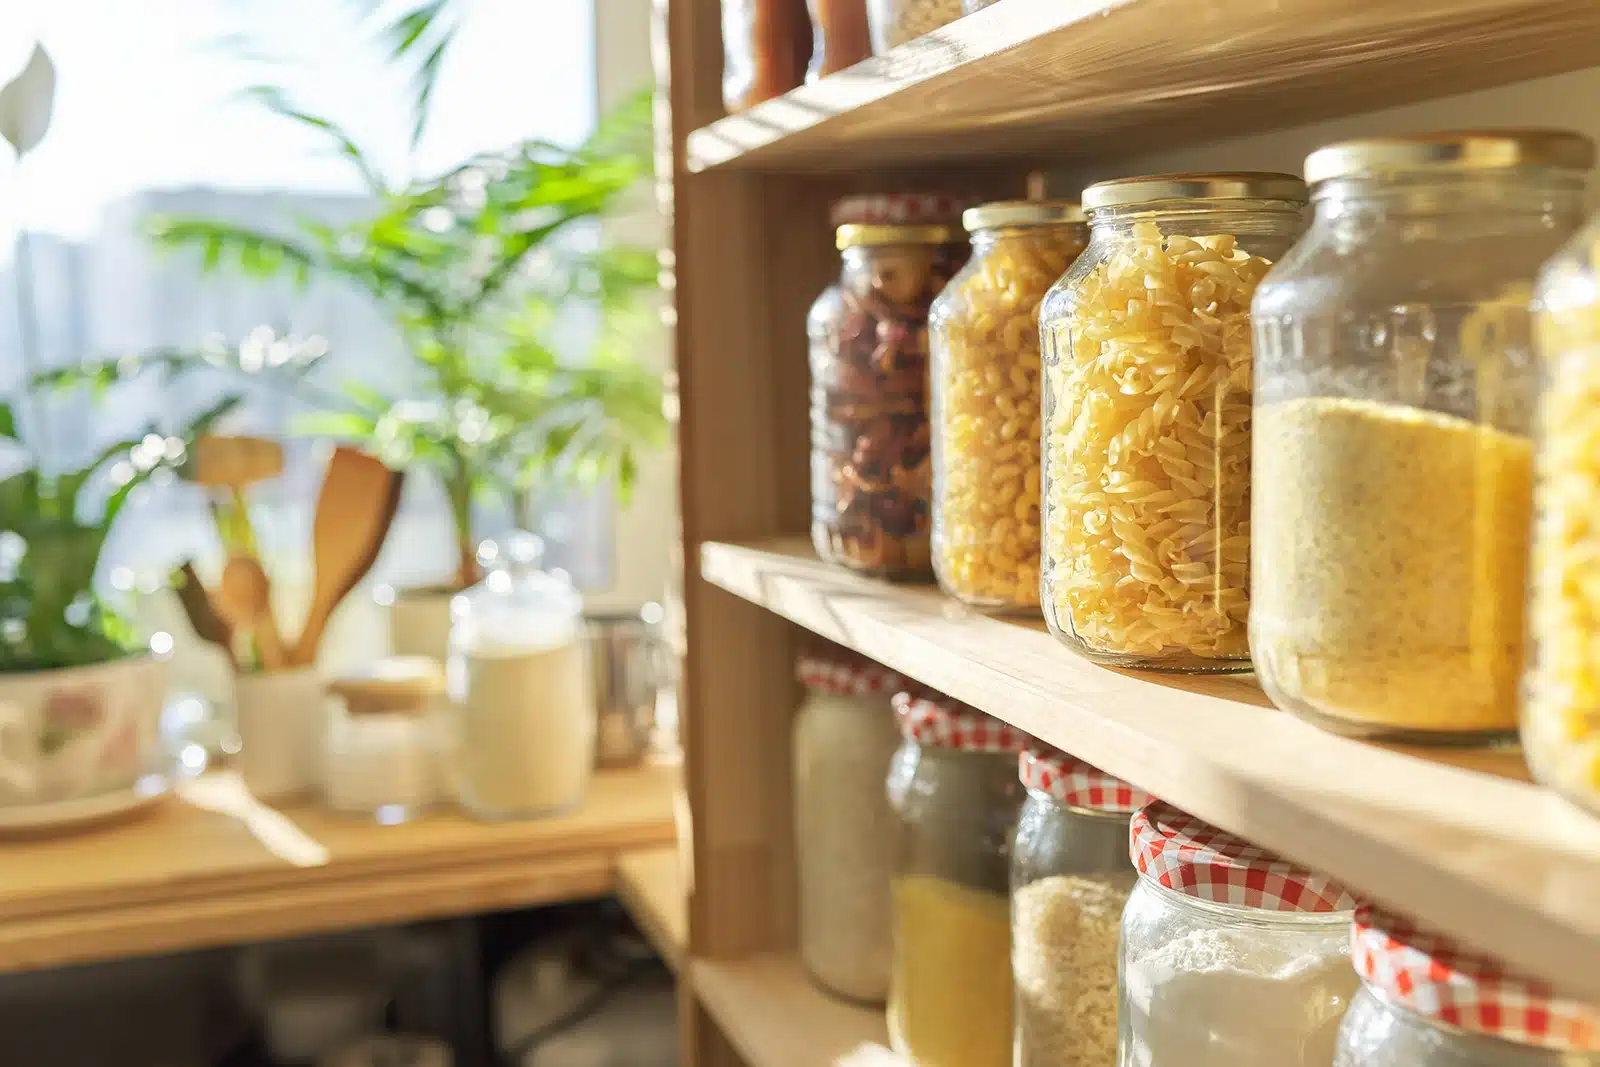 Wooden pantry shelves lined with clear glass jars filled with various grains and pasta, providing an organized and aesthetically pleasing food storage solution. Title: Organized Pantry with Visible Grain Storage